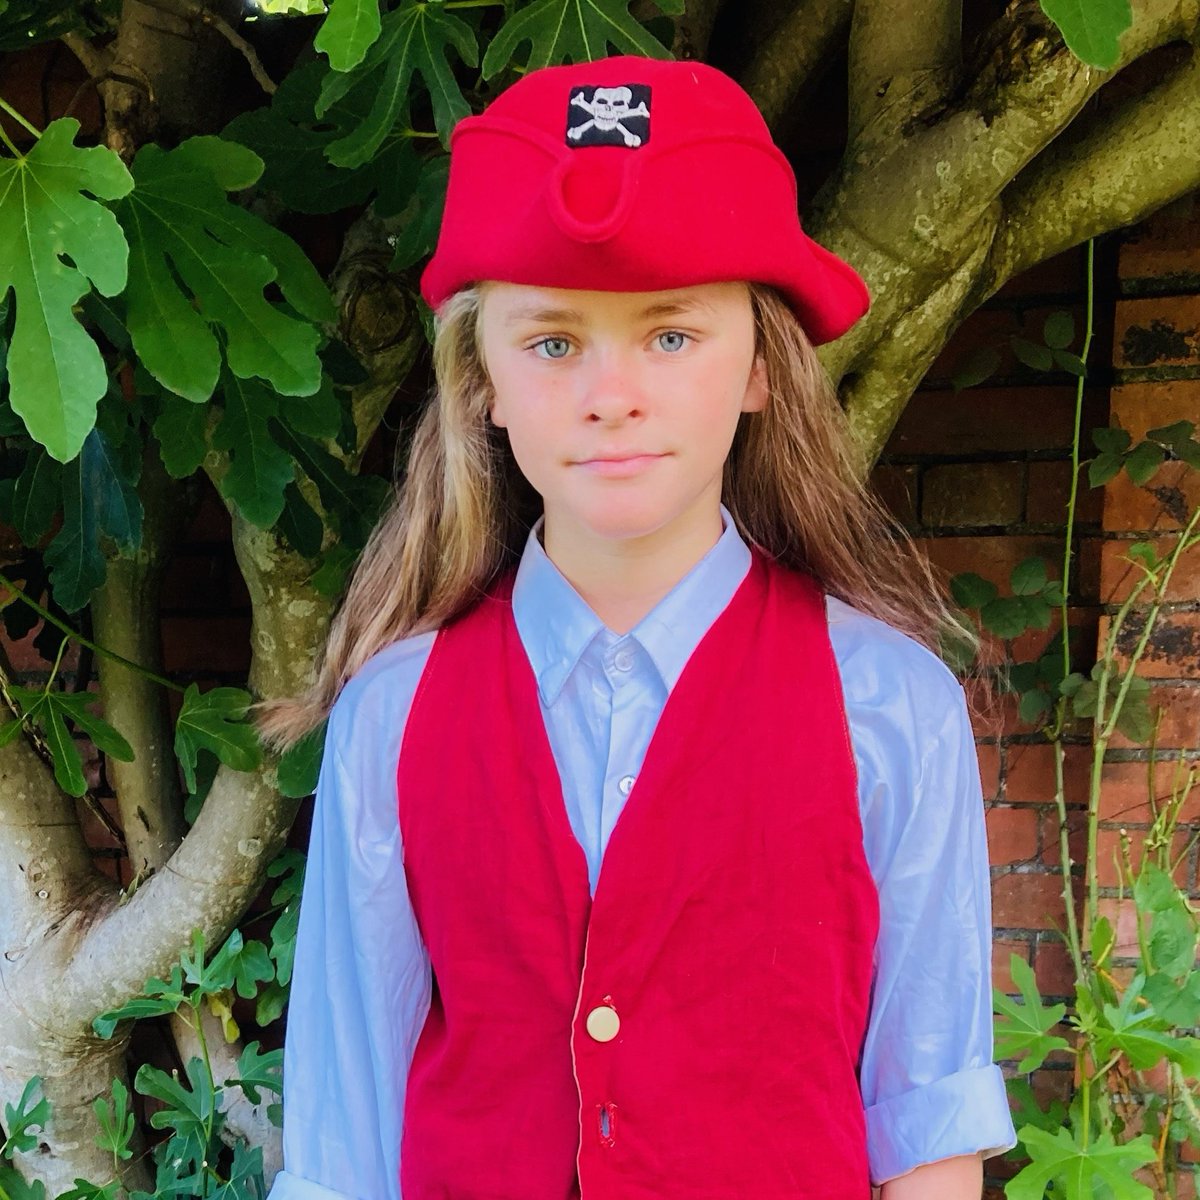 Bella in Year 6 spent a week with @LimelightTheatr at Somerset Performing Arts Centre in a musical production of ‘The Secret of Monkey Island’ which included dance, choreography and singing. A fabulous opportunity #excellence #loveoflearning #outstandingelationships